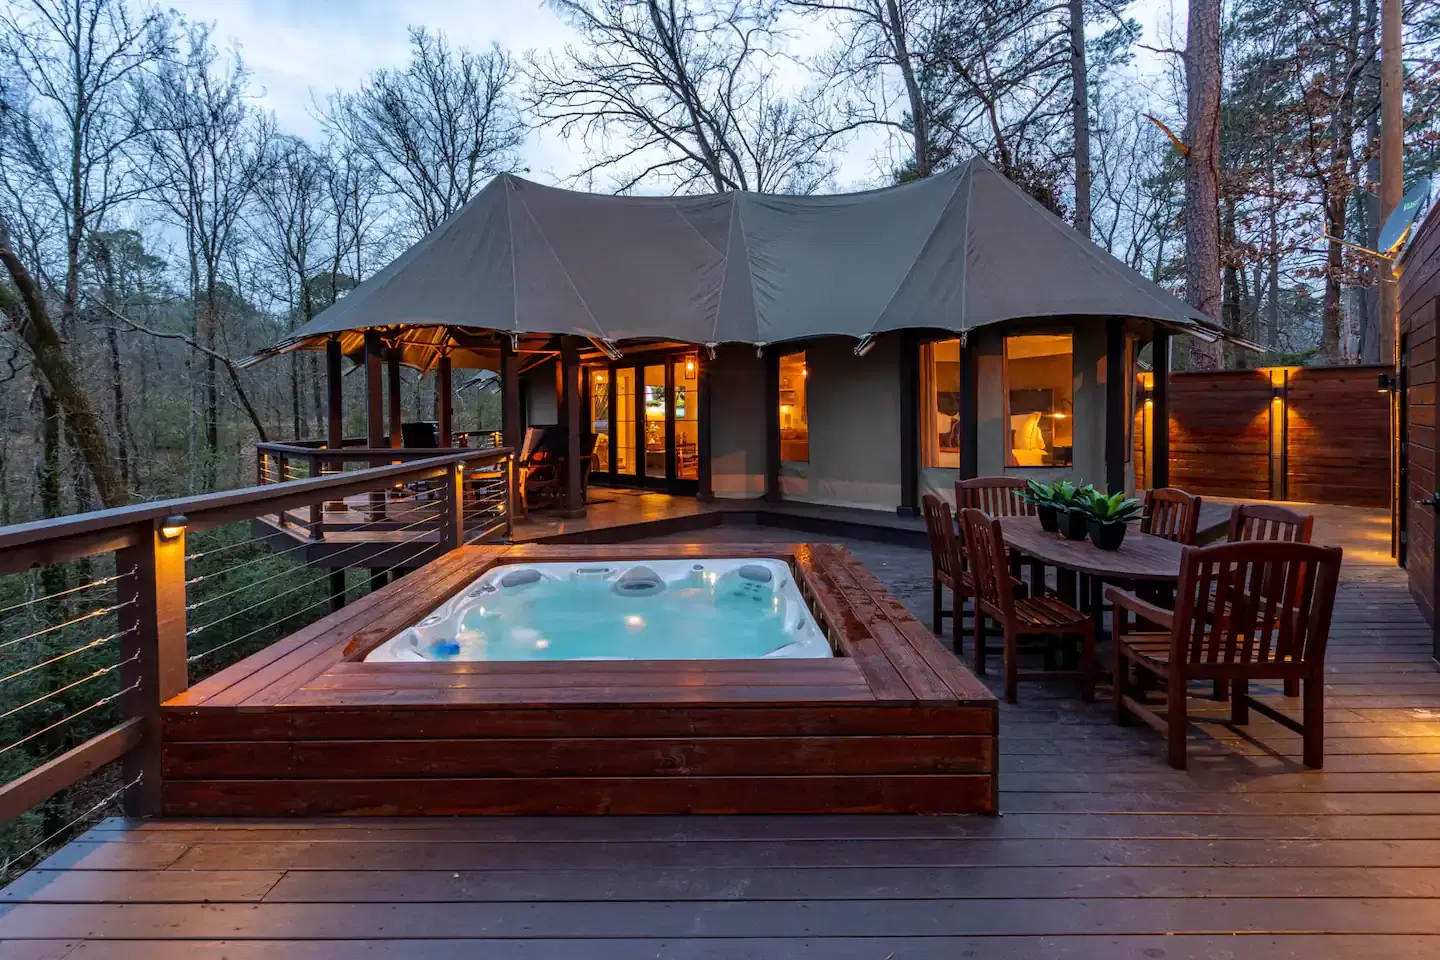 A modern glamping tent with a hot tub on a wooden deck surrounded by trees at dusk.